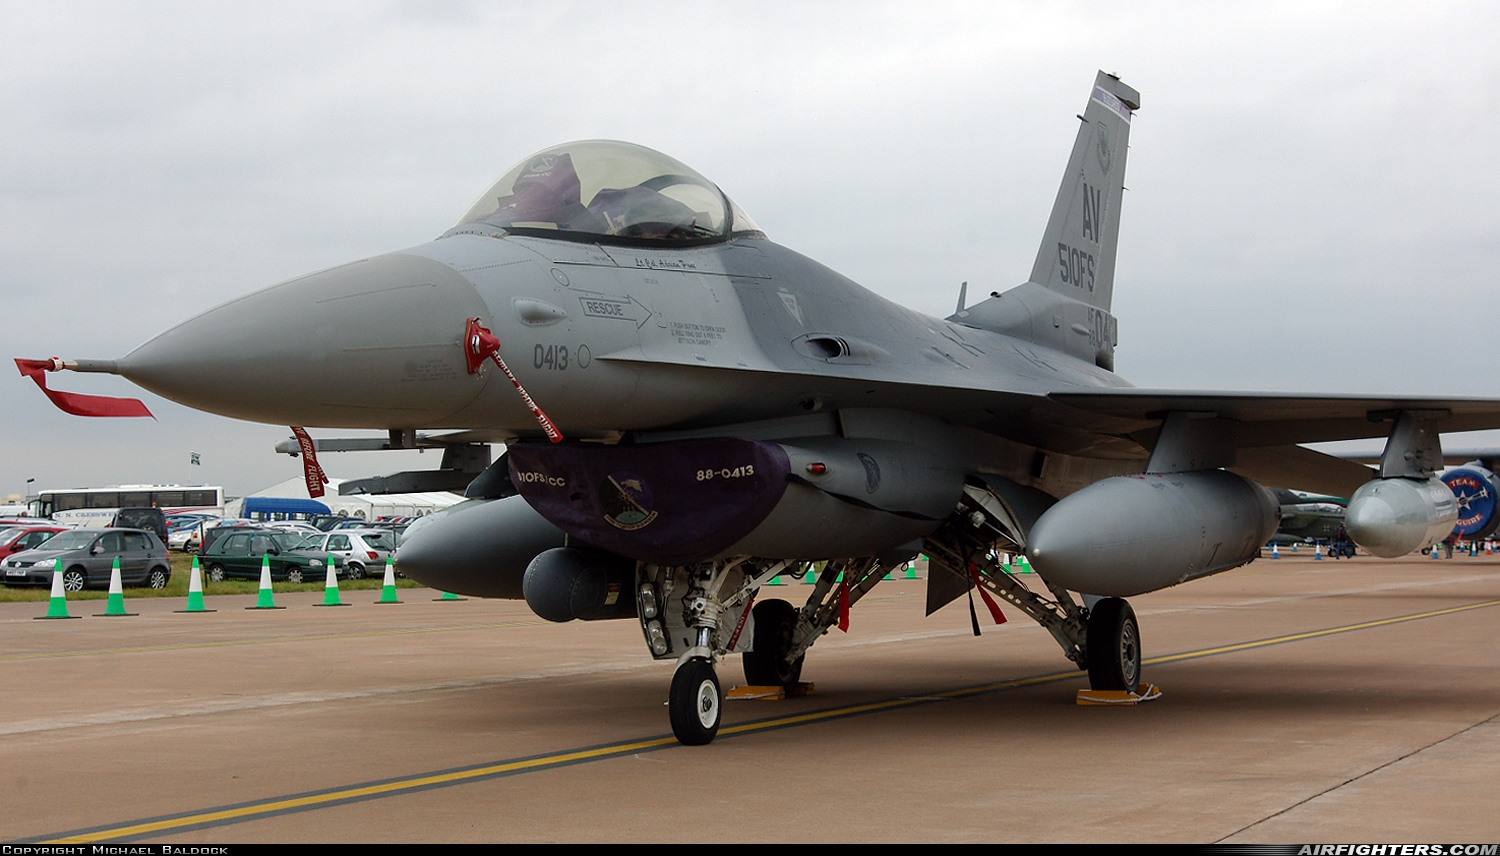 USA - Air Force General Dynamics F-16C Fighting Falcon 88-0413 at Fairford (FFD / EGVA), UK